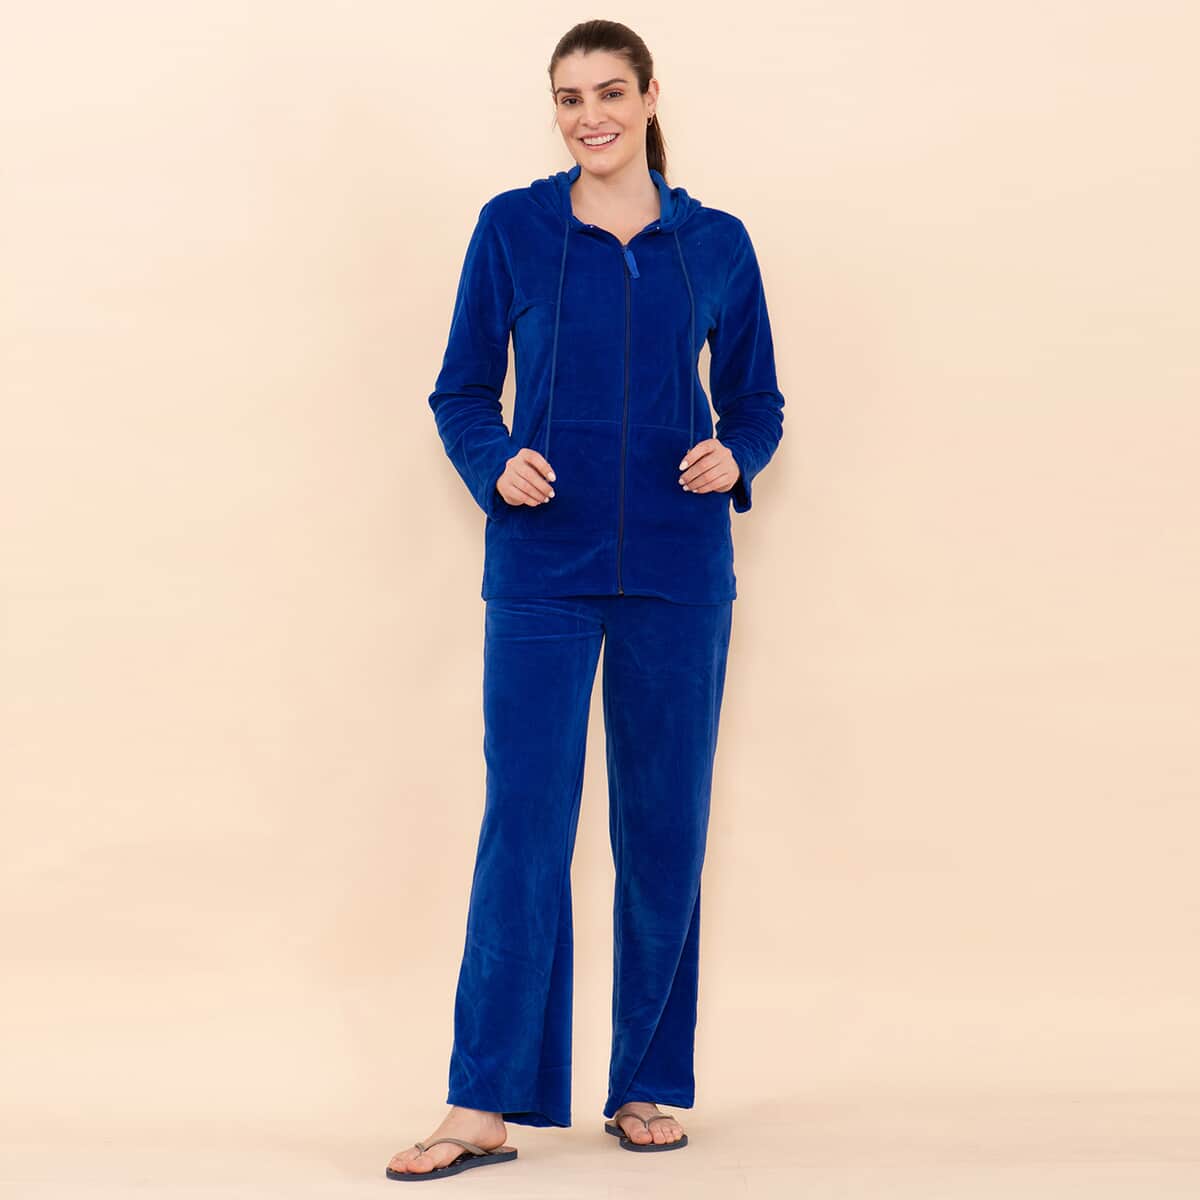 Tamsy LUX Blue Velour Track Suit Set - 1X image number 2